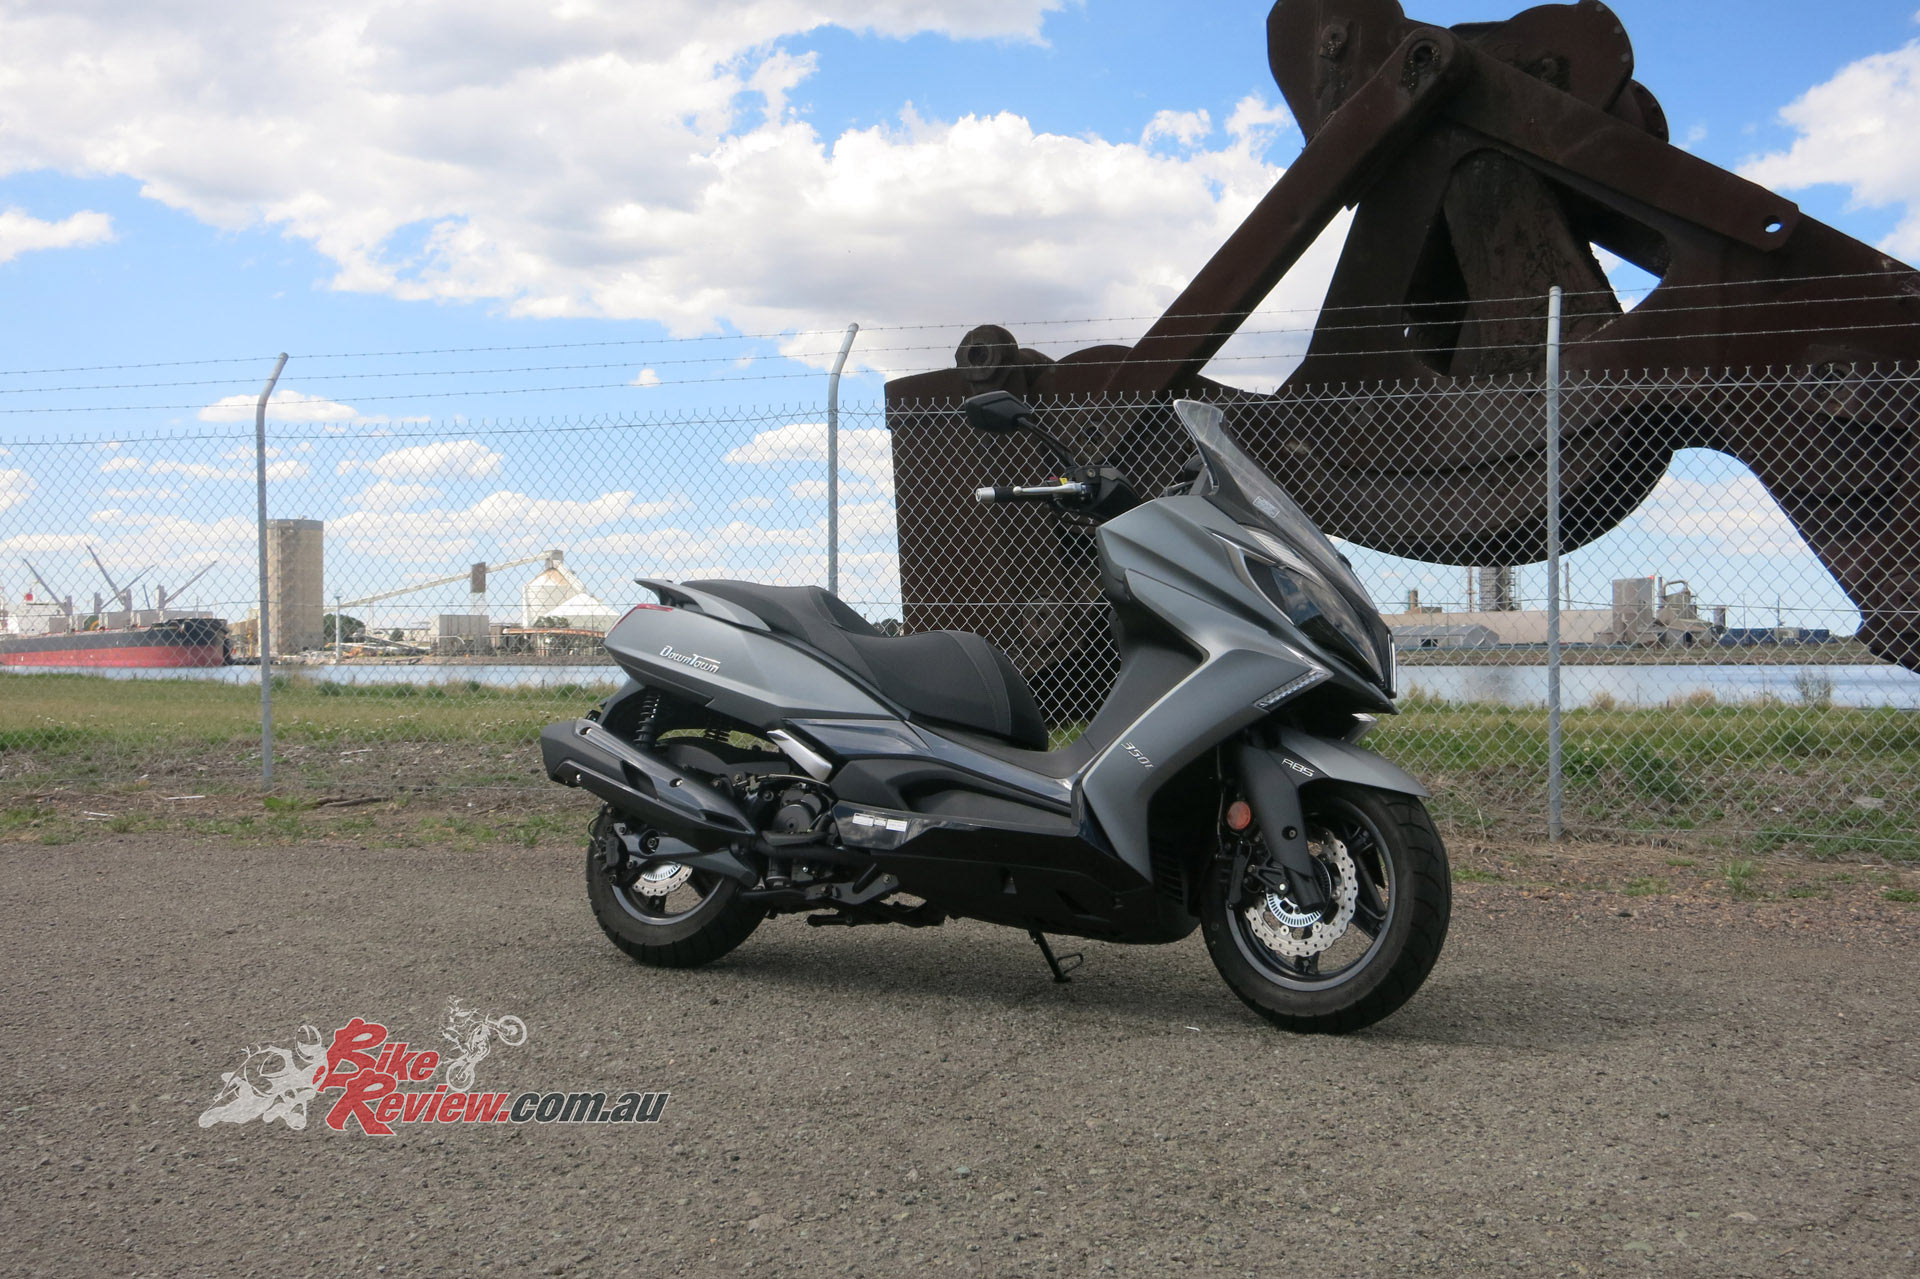 2PCS DOWNTOWN KYMCO DOWNTOWN 350i SIDE DECALS 